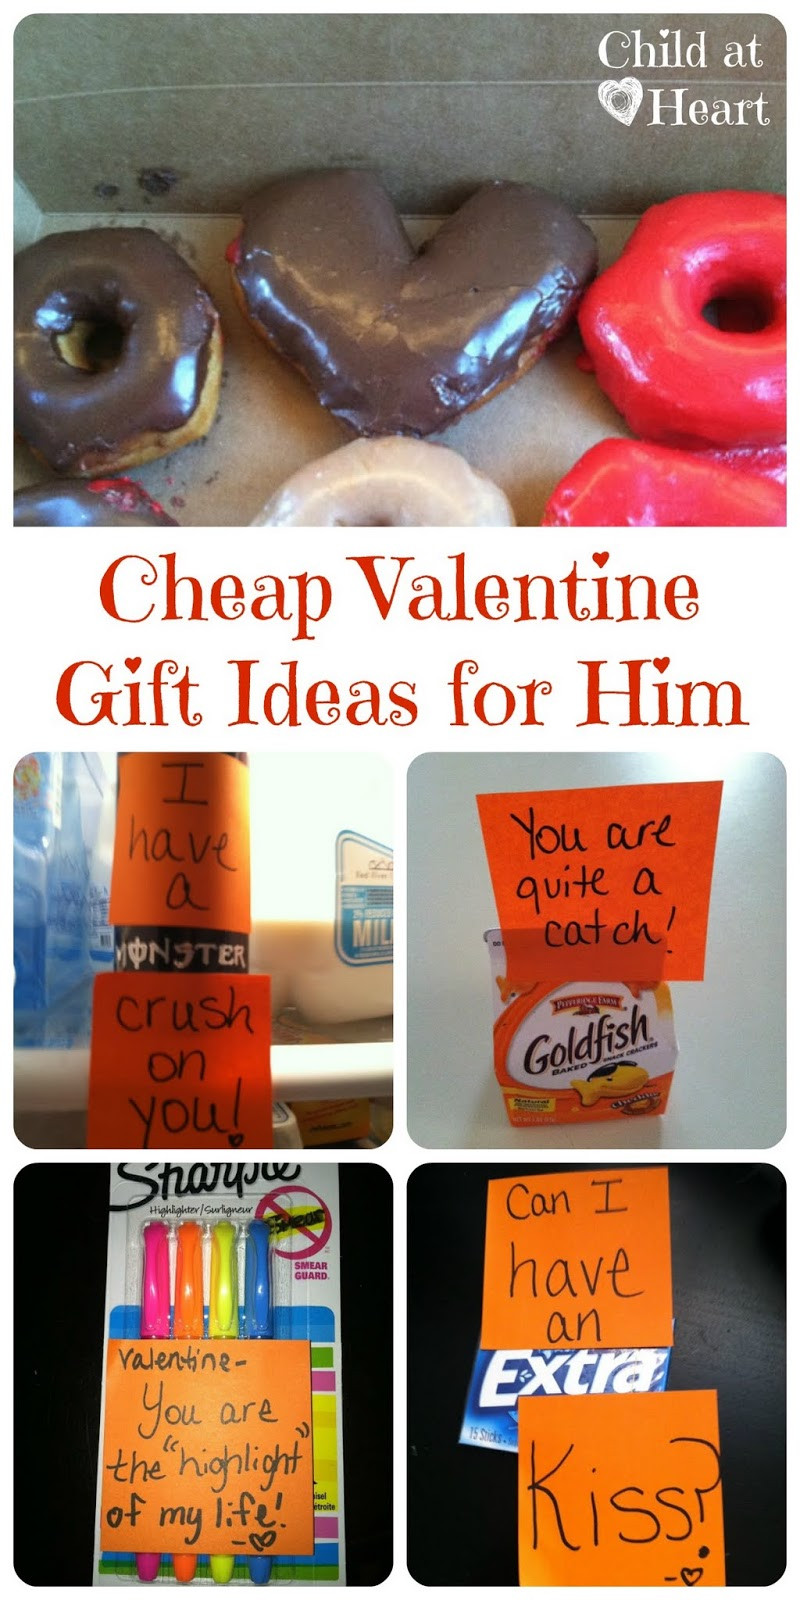 Valentines For Him Gift Ideas
 Cheap Valentine Gift Ideas for Him Child at Heart Blog